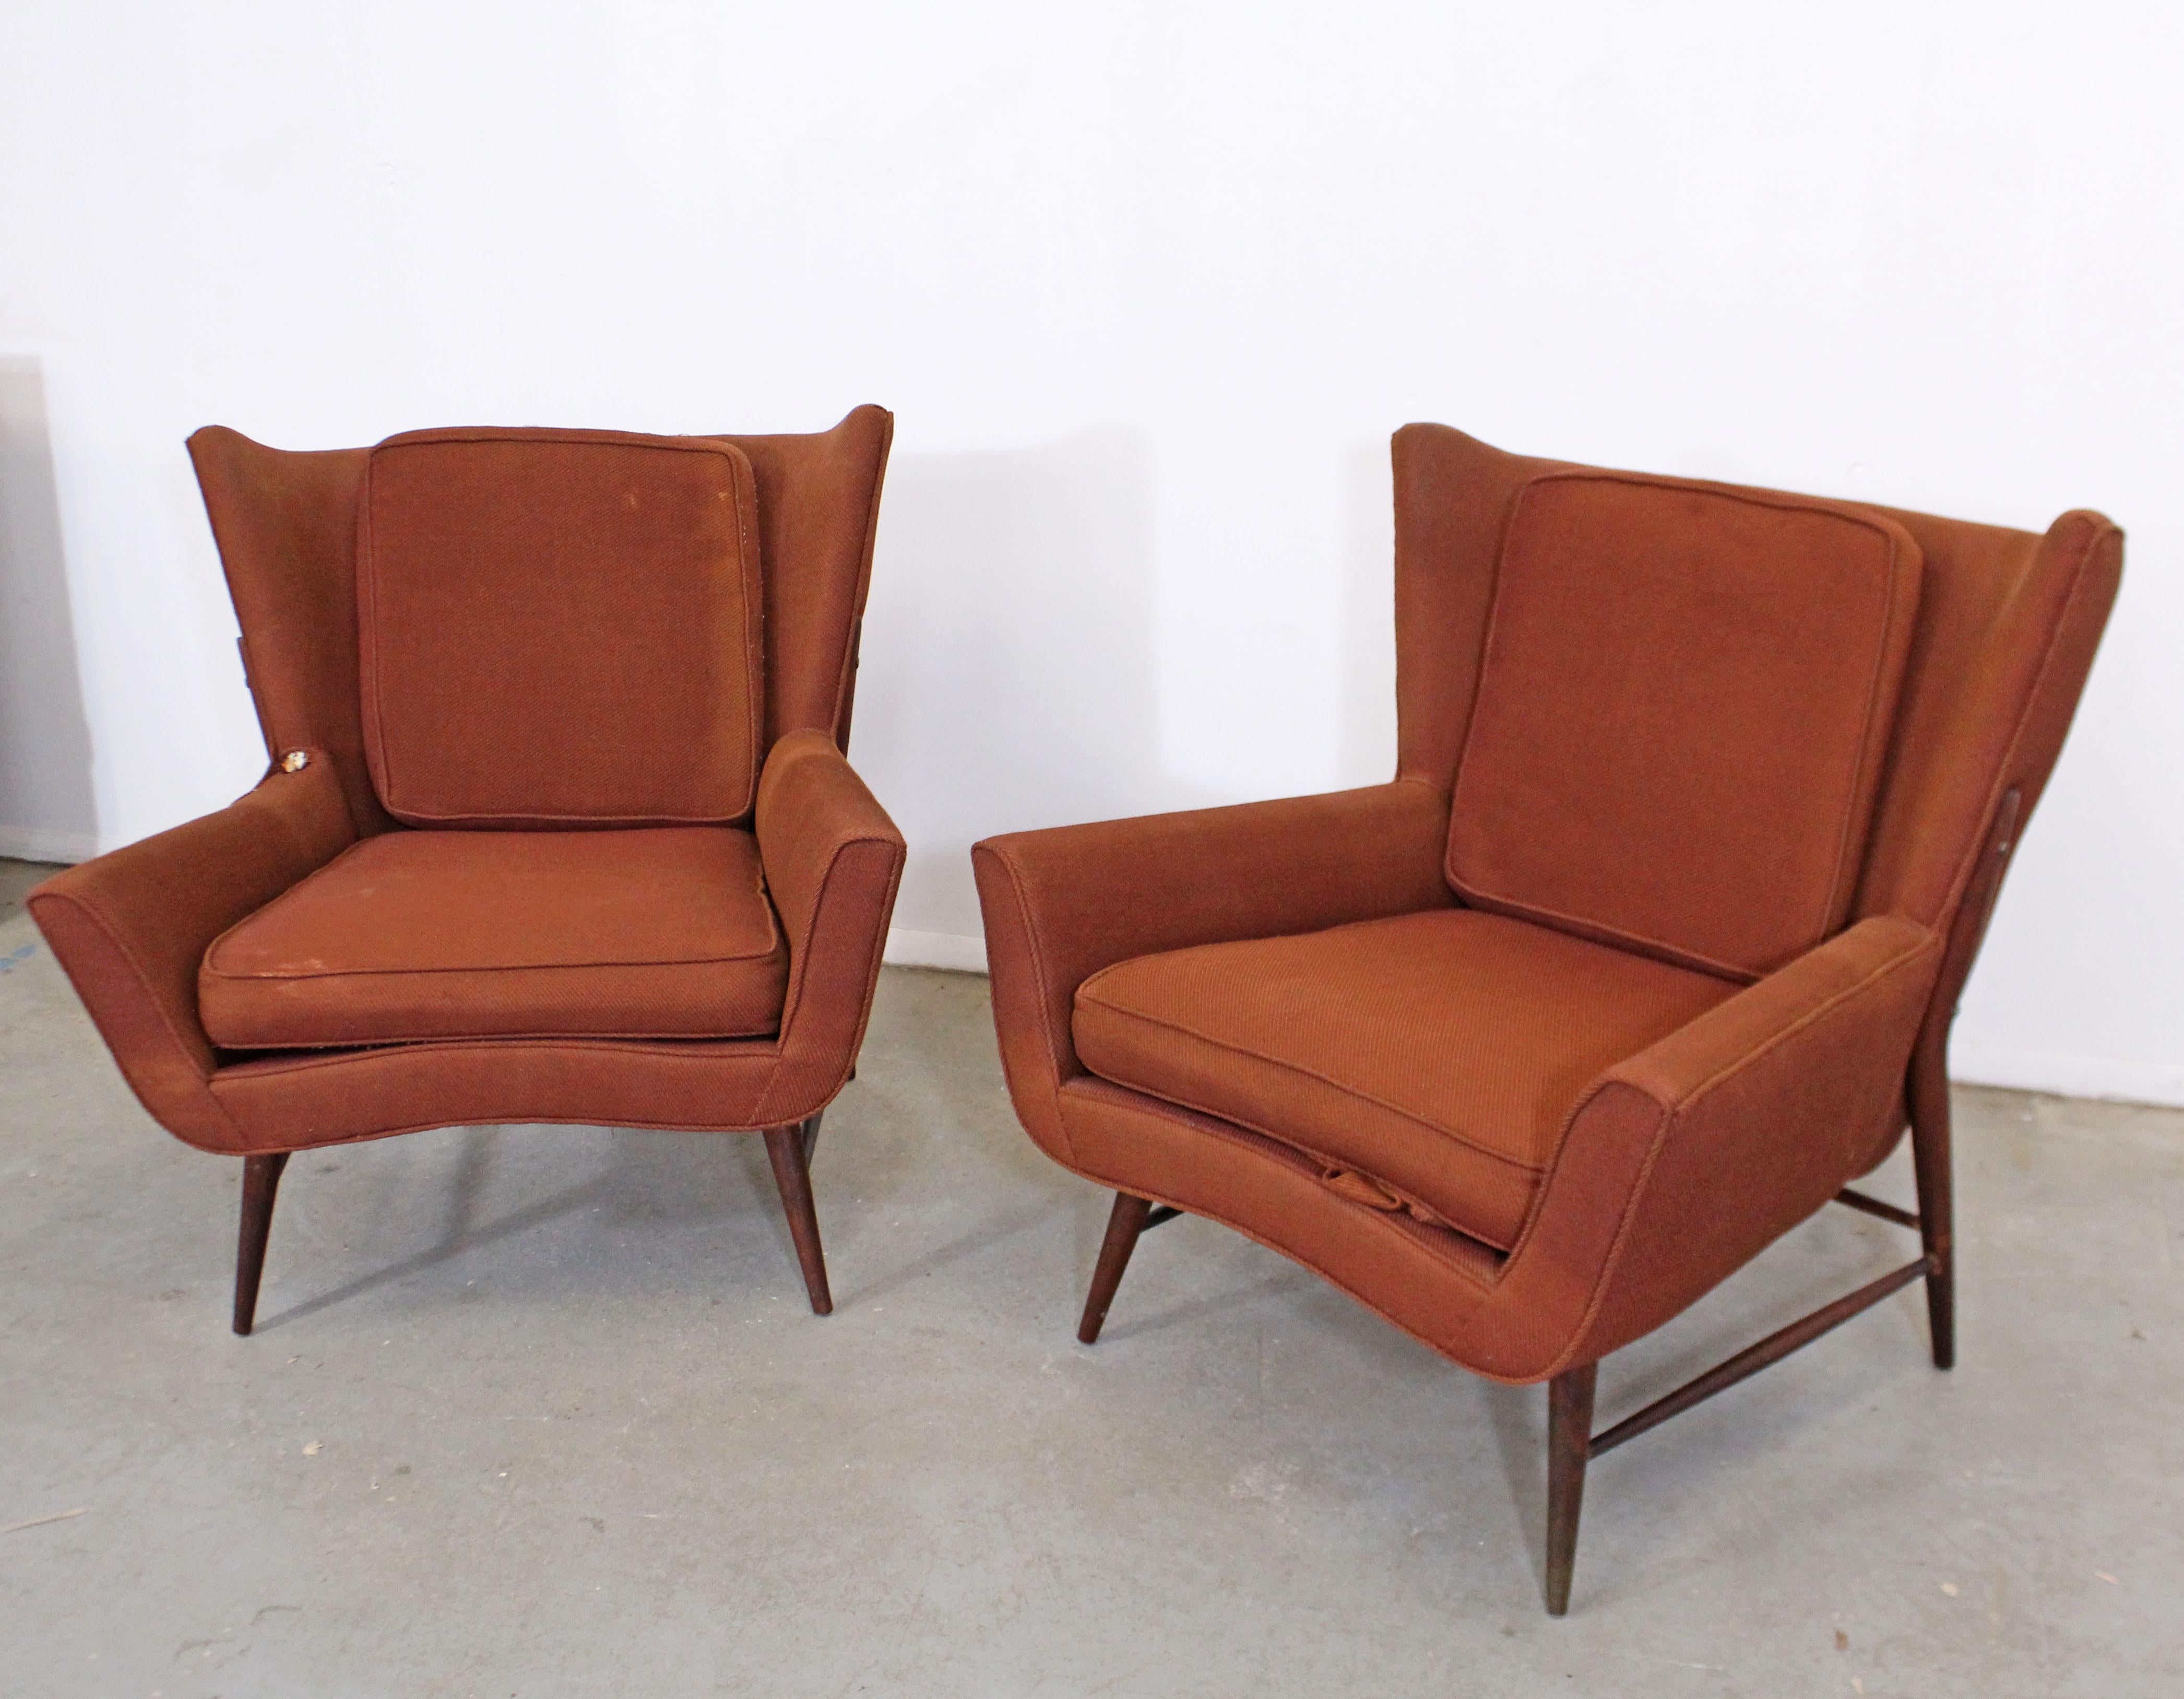 Offered is a pair of vintage mid century wing back lounge chairs. Absolutely incredible lines on these chairs. Featuring a unique shape, with high pencil legs and stretchers, these chairs perfect for any space or design project. Make them your own!